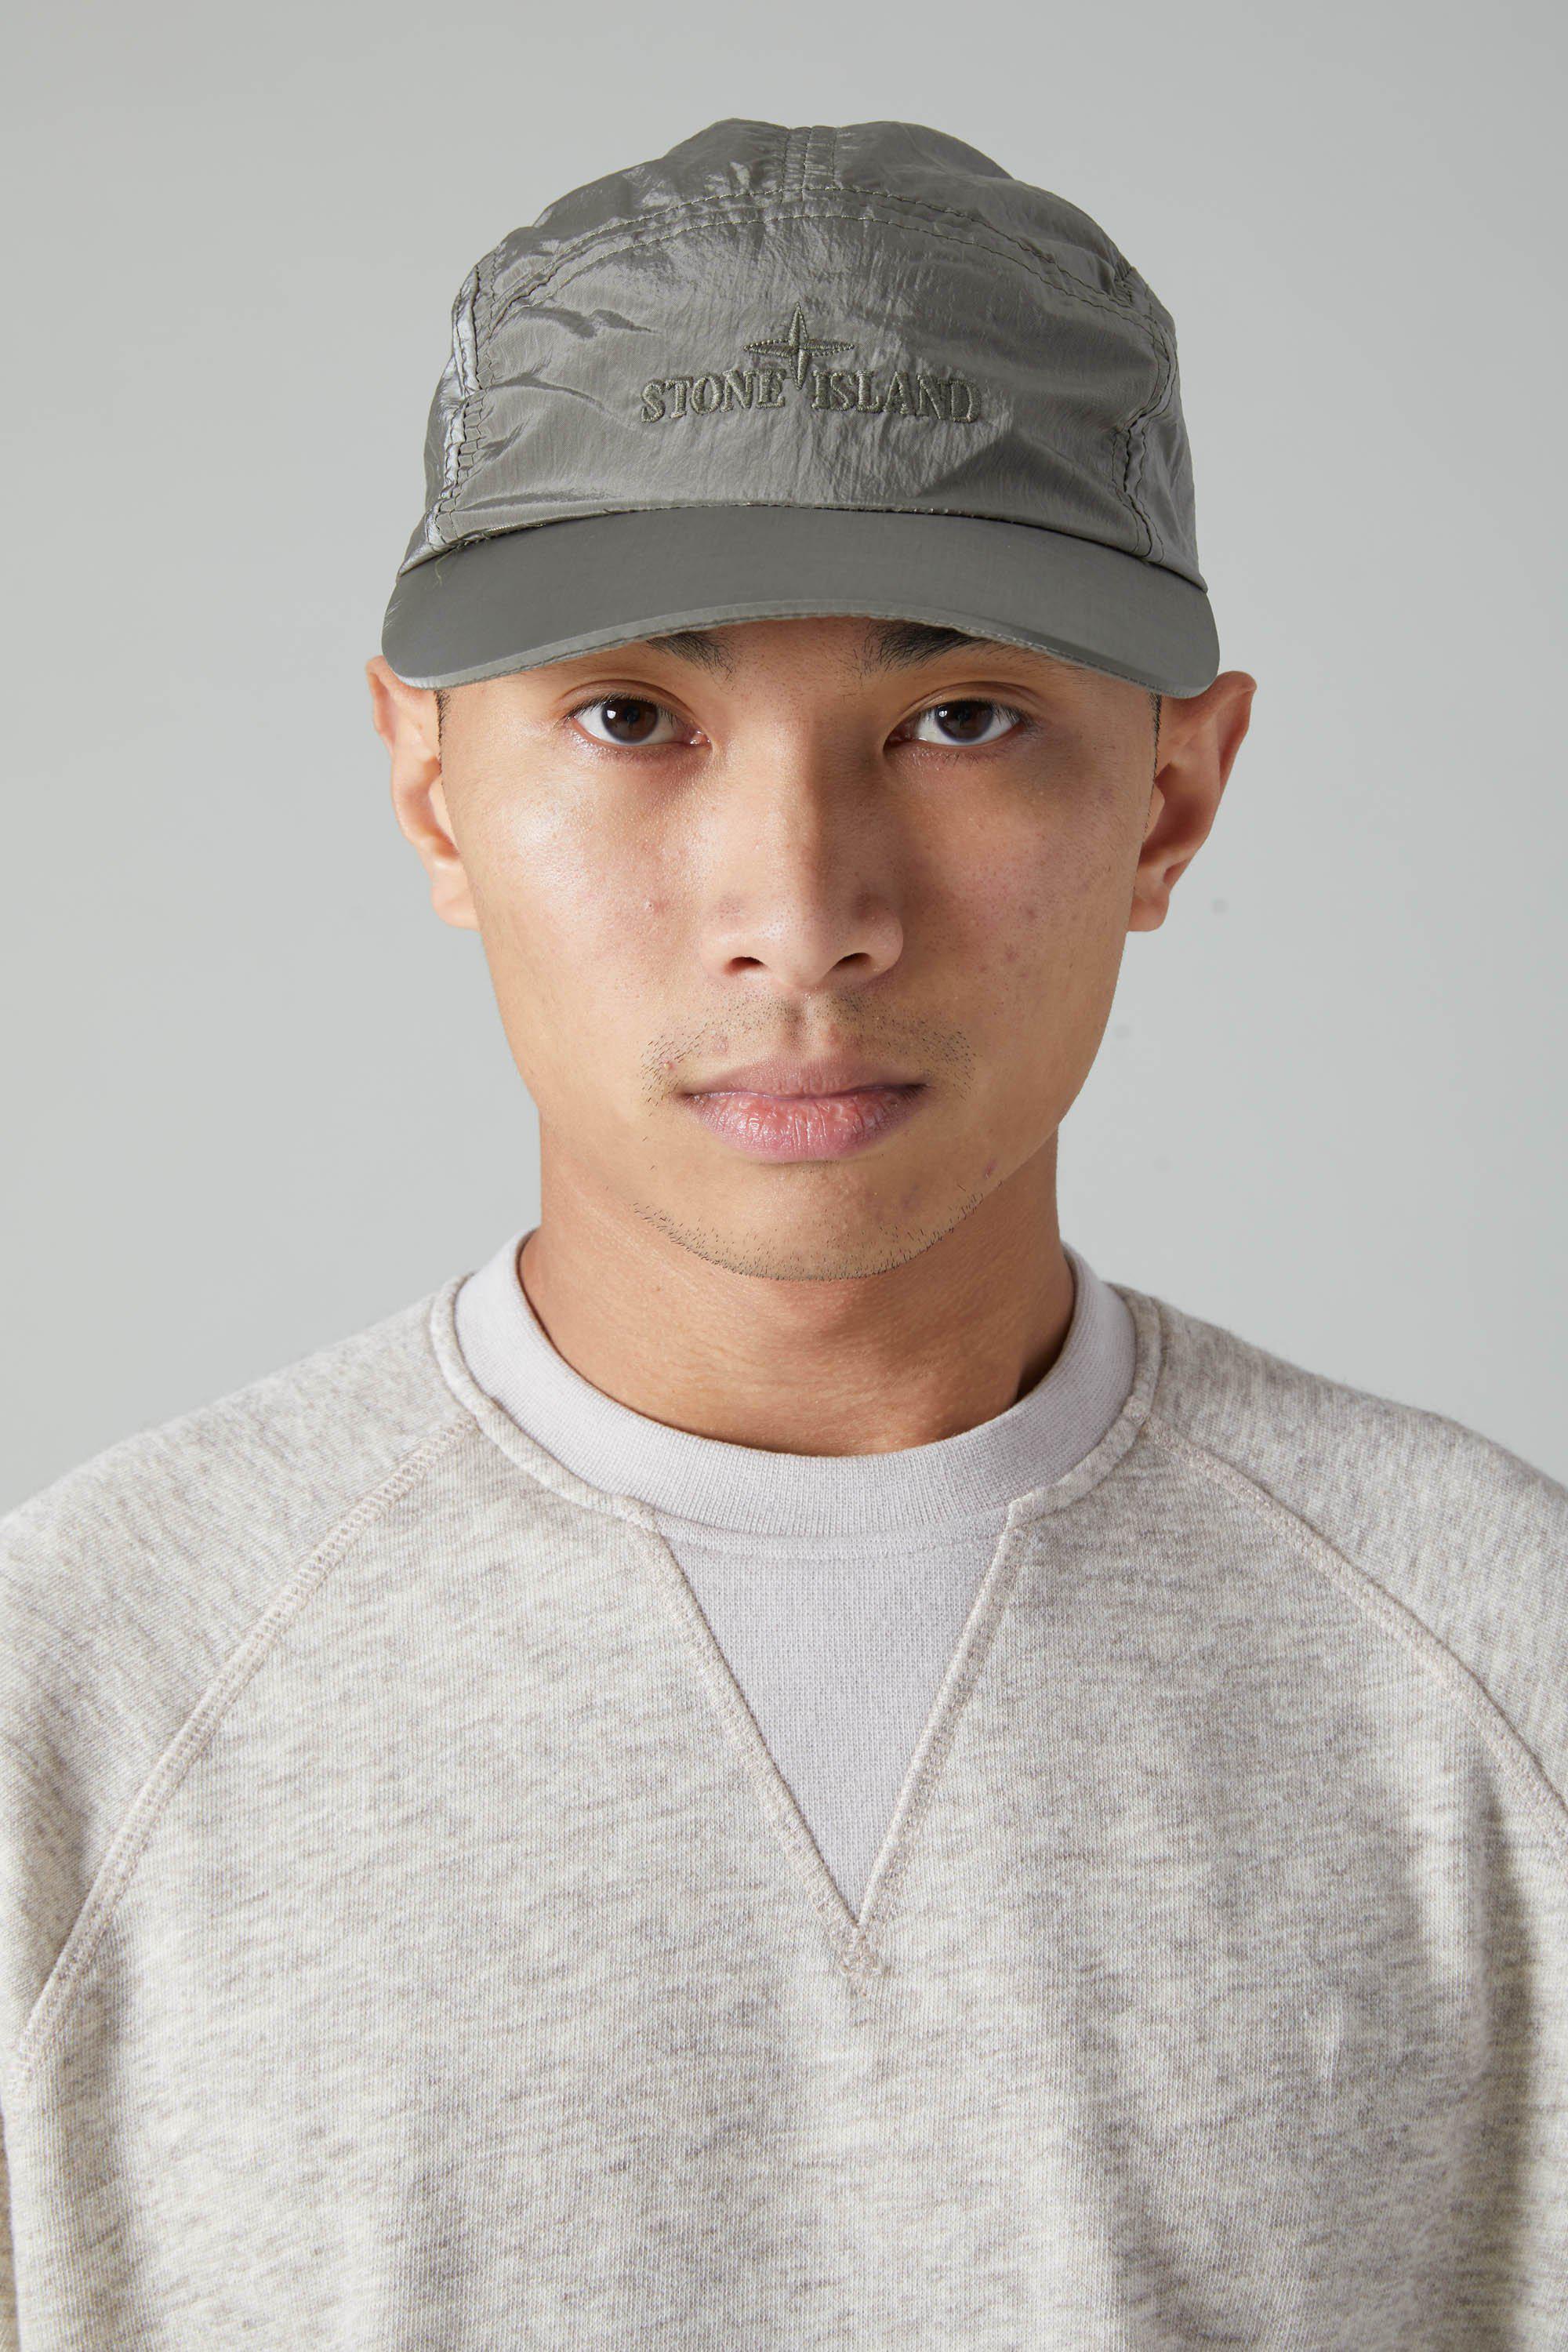 Stone Island Synthetic 99876 Nylon Metal Terry Lined Cap in Olive (Green)  for Men - Lyst